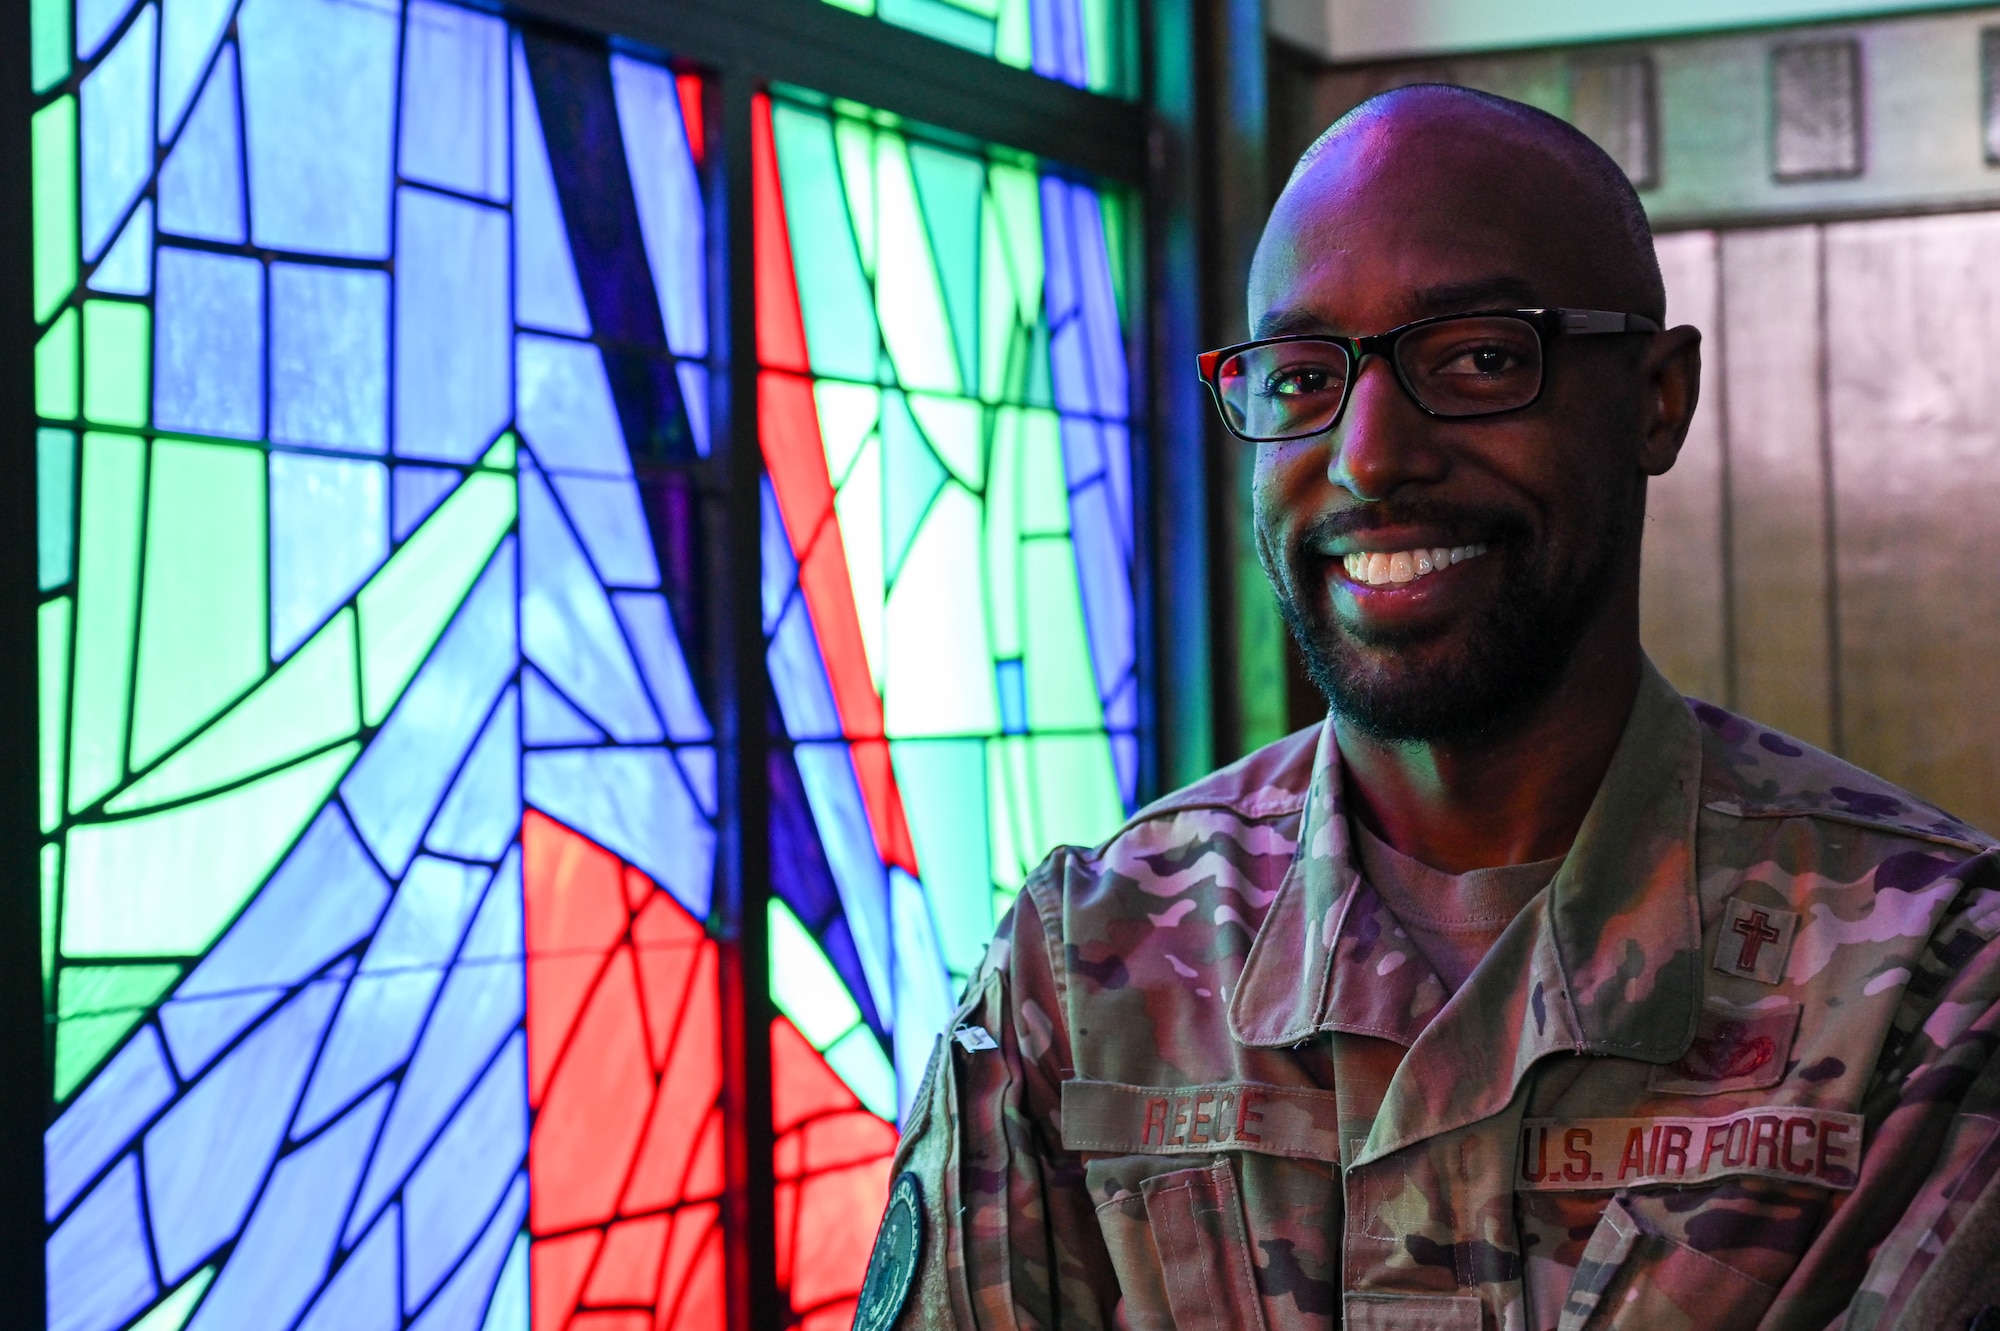 U.S. Air Force Capt. Lamar Reece, 97th Air Mobility Wing deputy chaplain, poses for a photo at the Chapel at Altus Air Force Base, Oklahoma, July 24, 2023. Reece served nine years as enlisted before commissioning as a chaplain. (U.S. Air Force photo by Senior Airman Kayla Christenson)